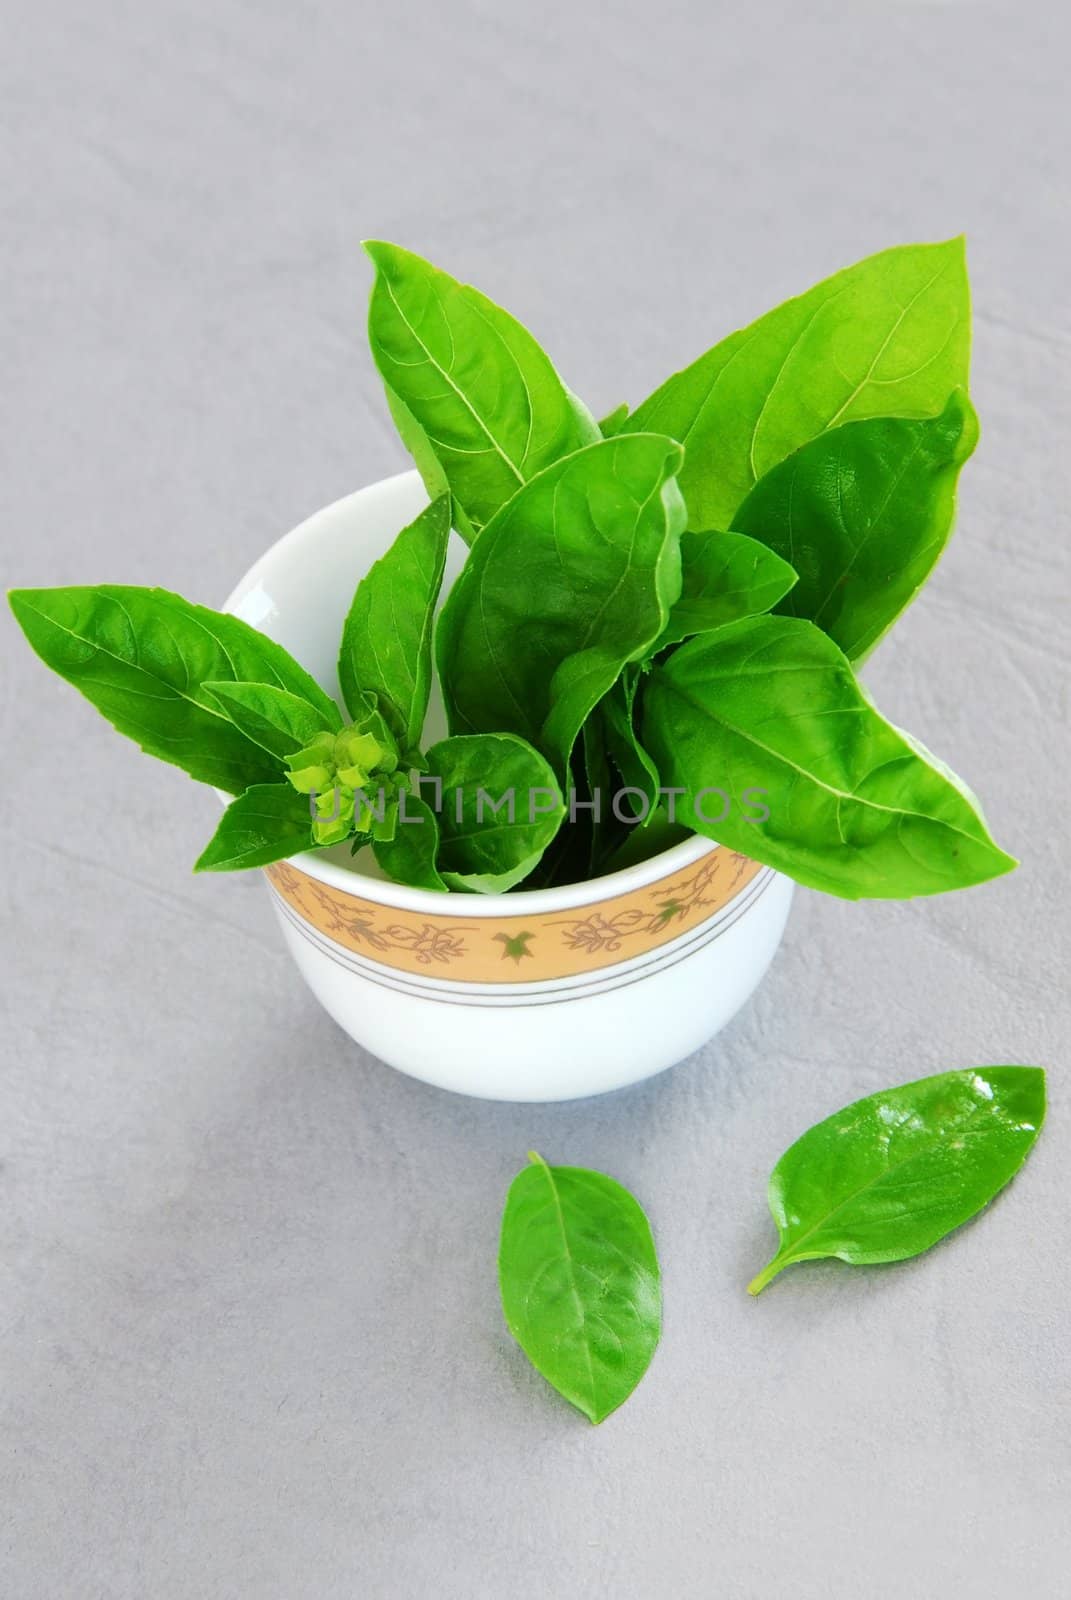 fresh basil leaves in a white porcelain bowl over gray background